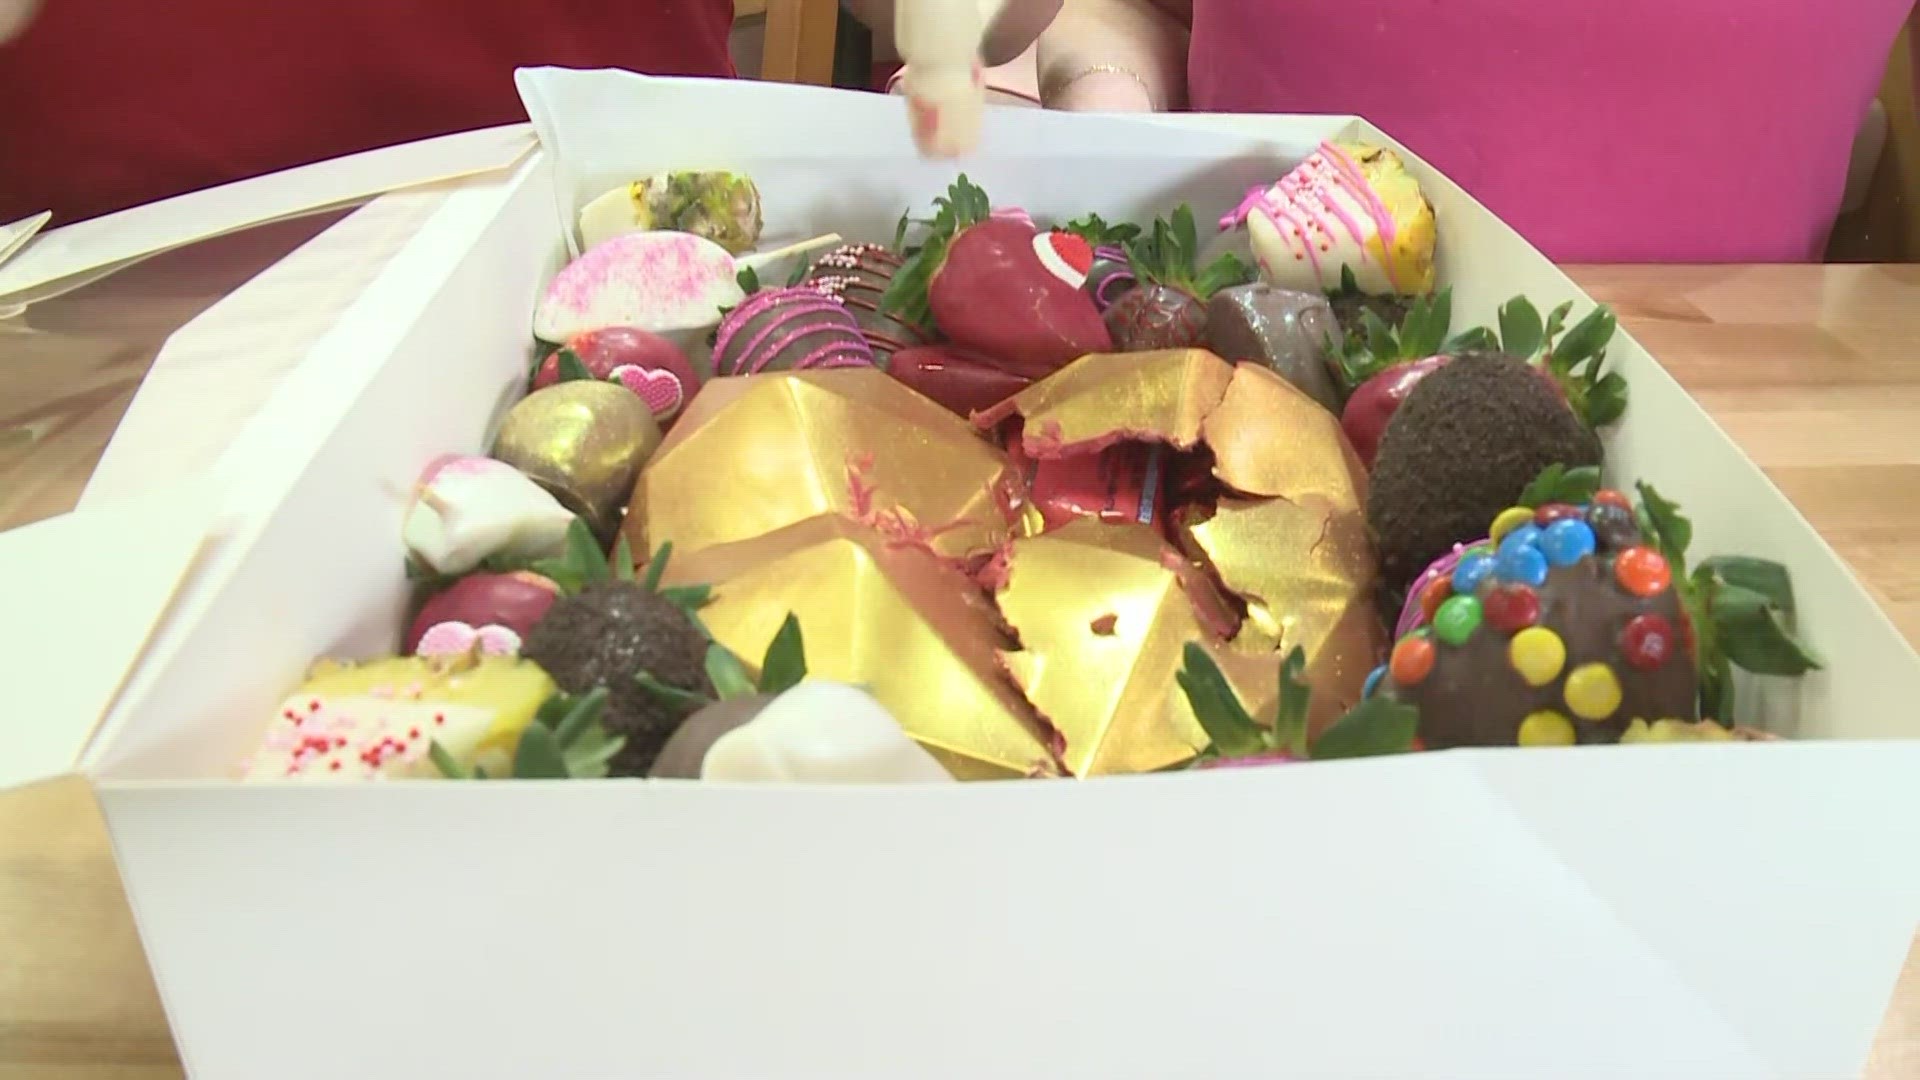 NEWS CENTER Maine's Aaron Myler went to Sisters Gourmet Deli in Bath, where they're making some holiday treats.